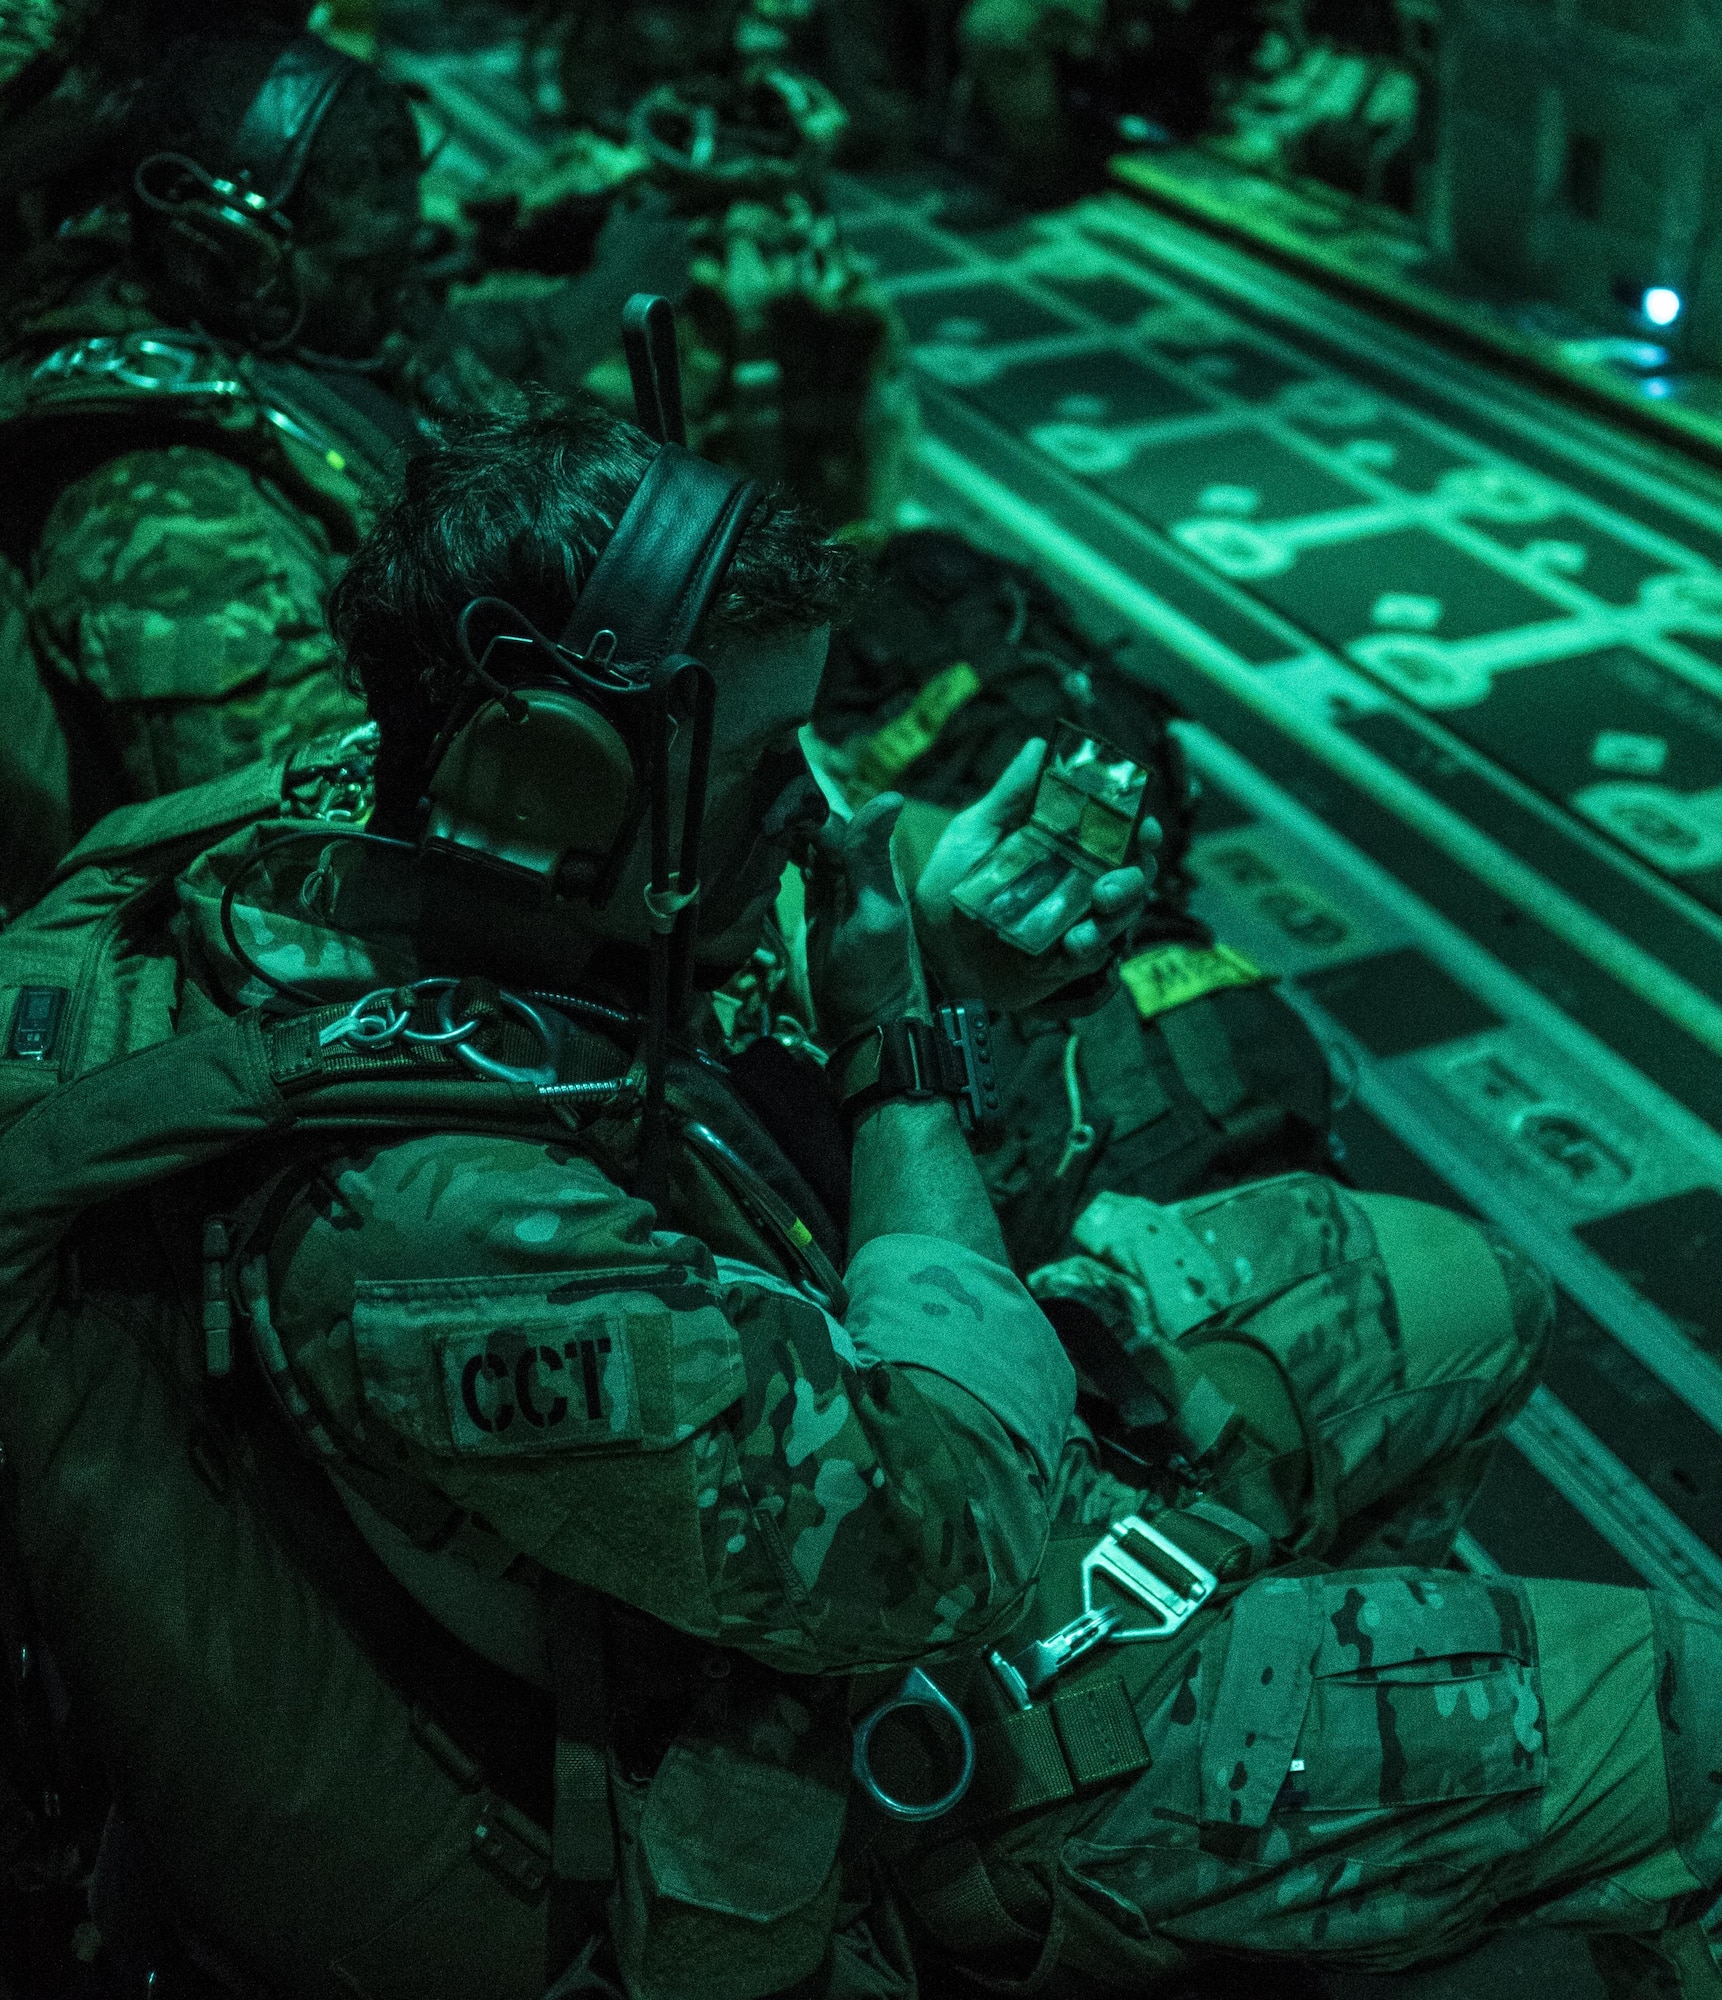 A U.S. Air Force 320th Special Tactics Squadron jumpmaster applies face paint prior to high altitude, high opening (HAHO) jump operations July 11, 2017, at Rockhampton, Australia during Talisman Saber 2017. The infiltration of 320th STS combat controllers and U.S. Marine Corps 3rd Reconnaissance Battalion operators served as the first stage to the exercise’s massive tactical (MASS TAC) airdrop of 500 jumpers over Shoalwater Training Area in Queensland, Australia. (U.S. Air Force photo by Capt. Jessica Tait)